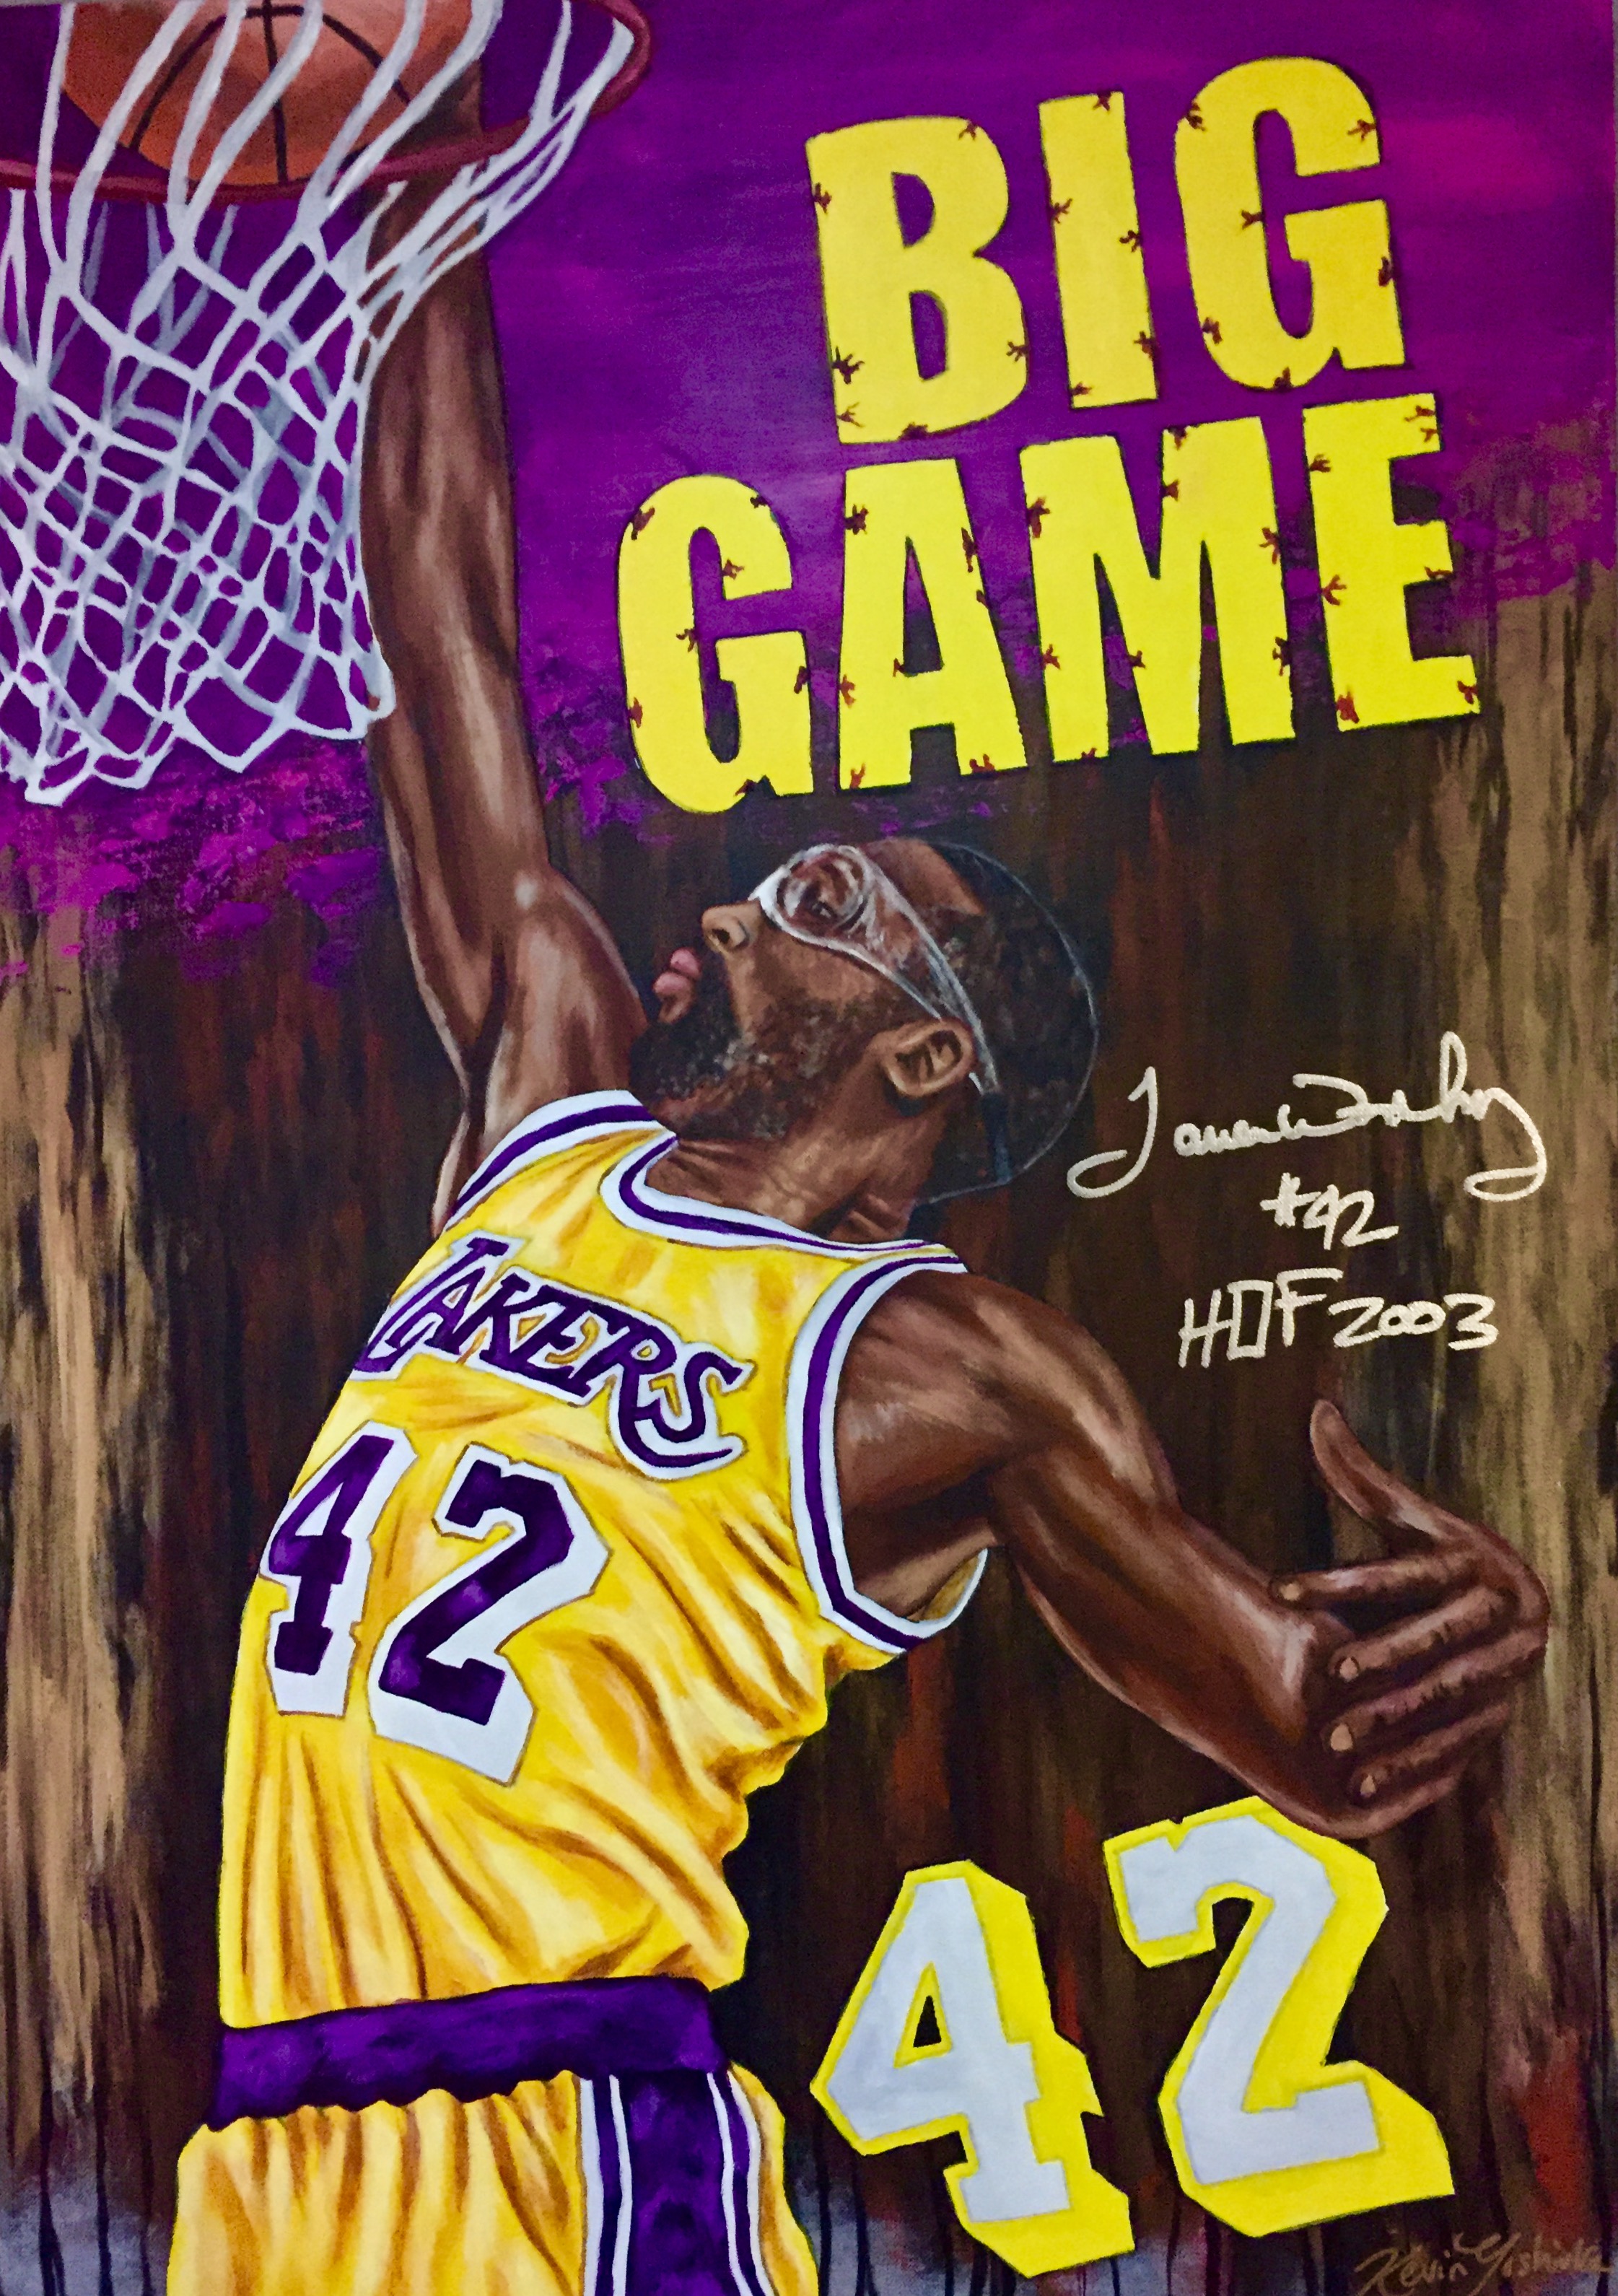 Los Angeles Lakers History by whatevah32 on DeviantArt